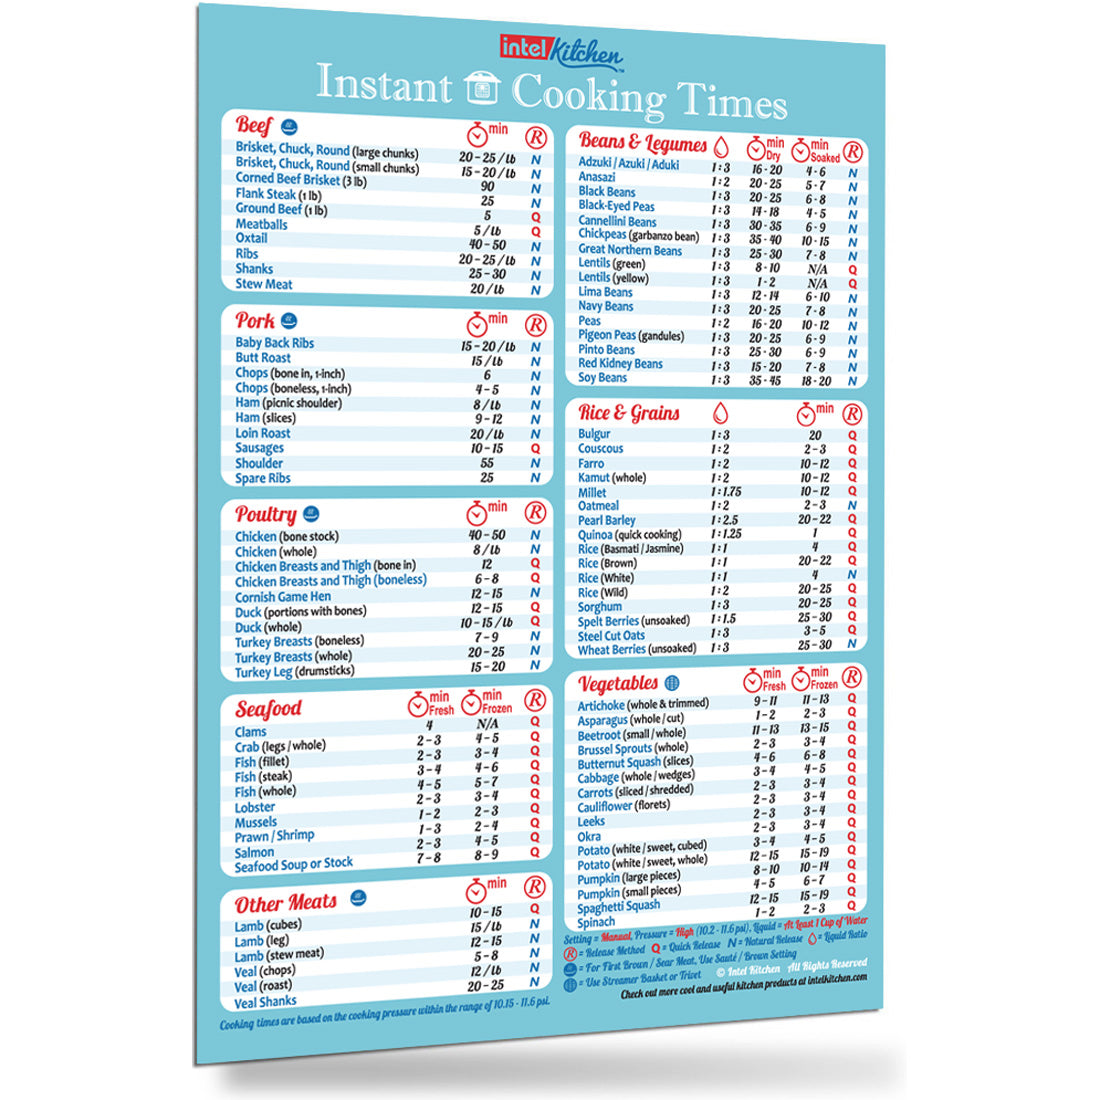 Instant Pot Cooking Times Cheat Sheet